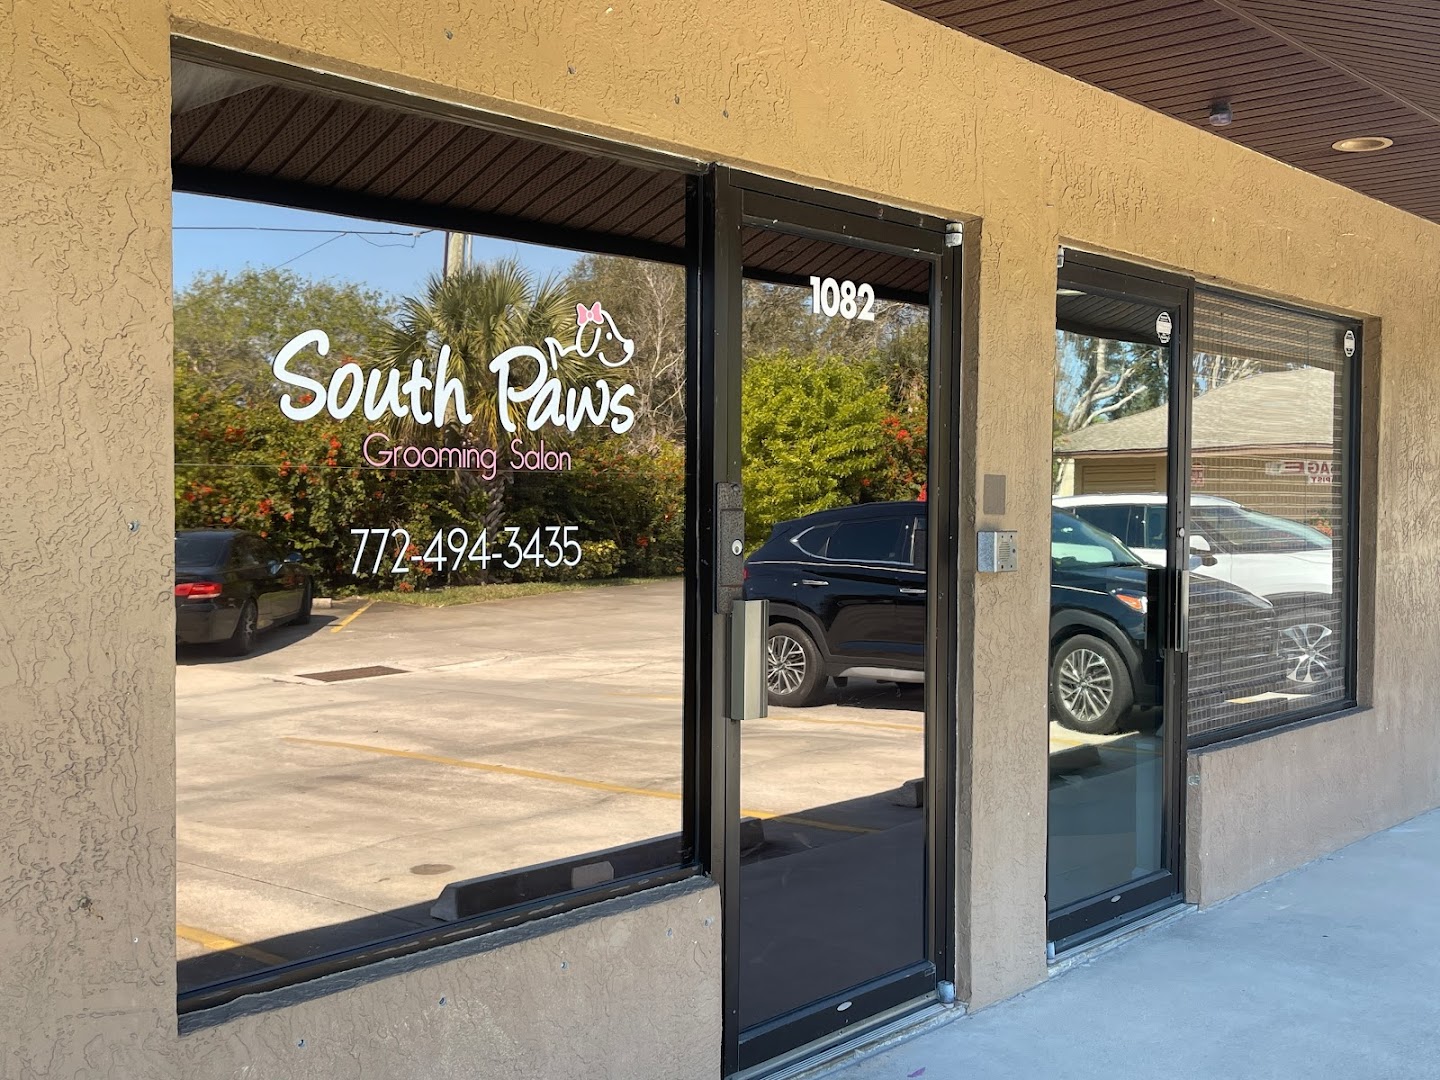 South Paws Grooming Salon